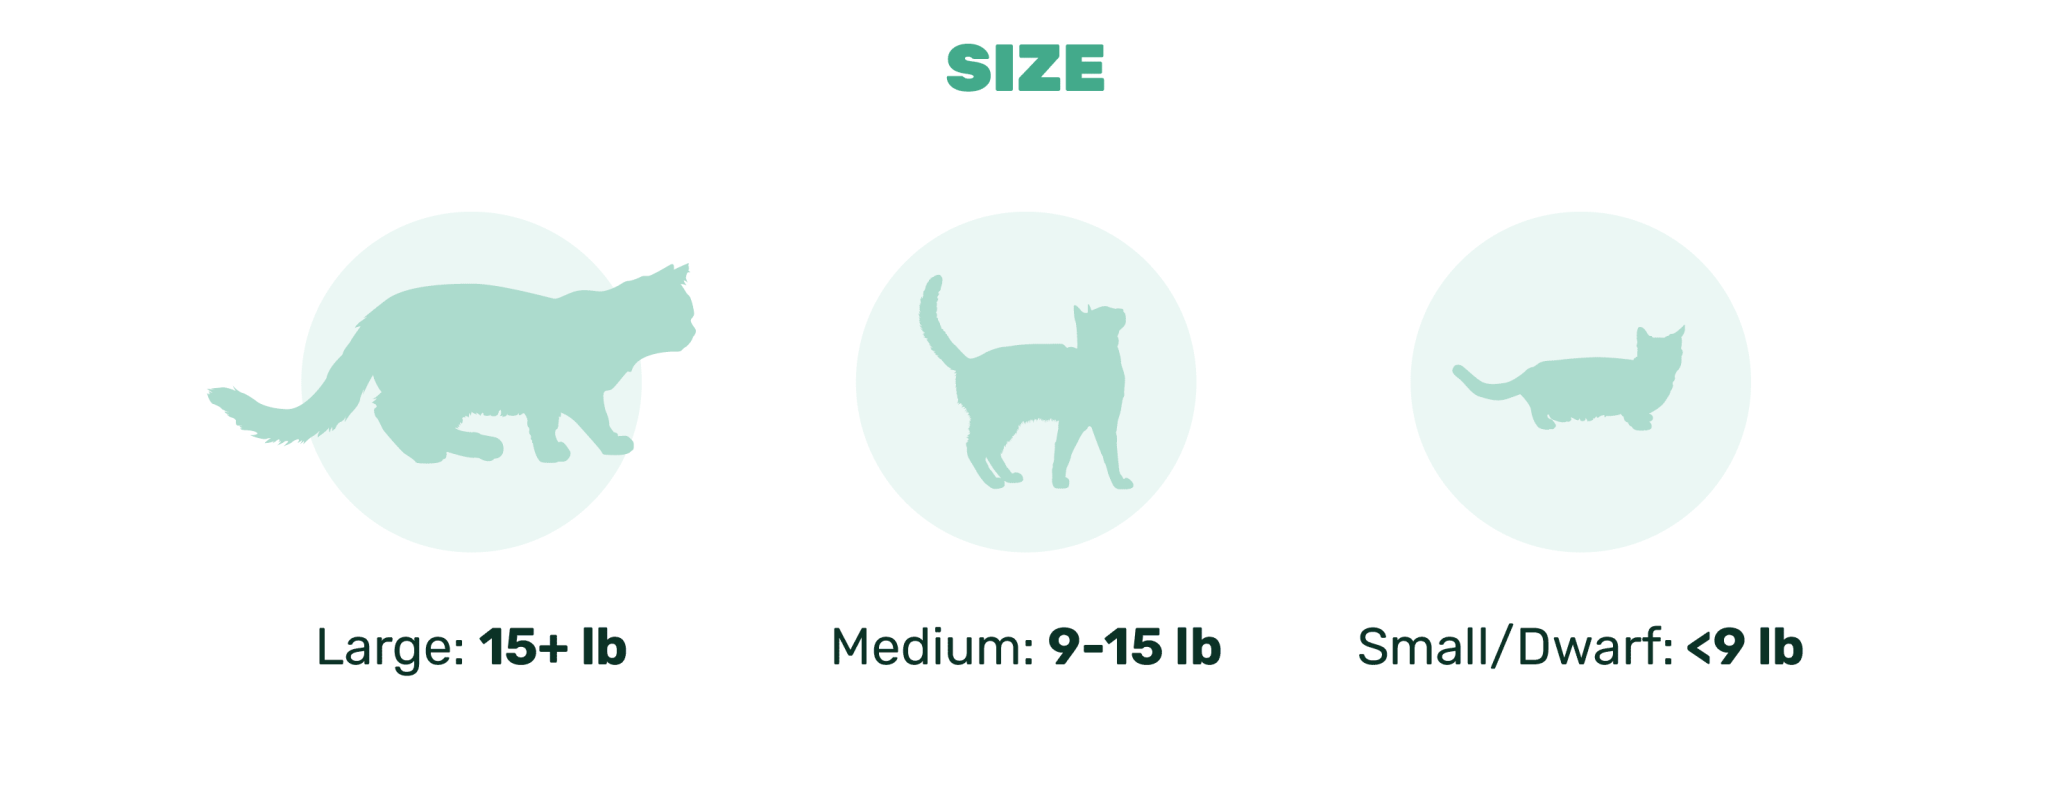 cat size infographic